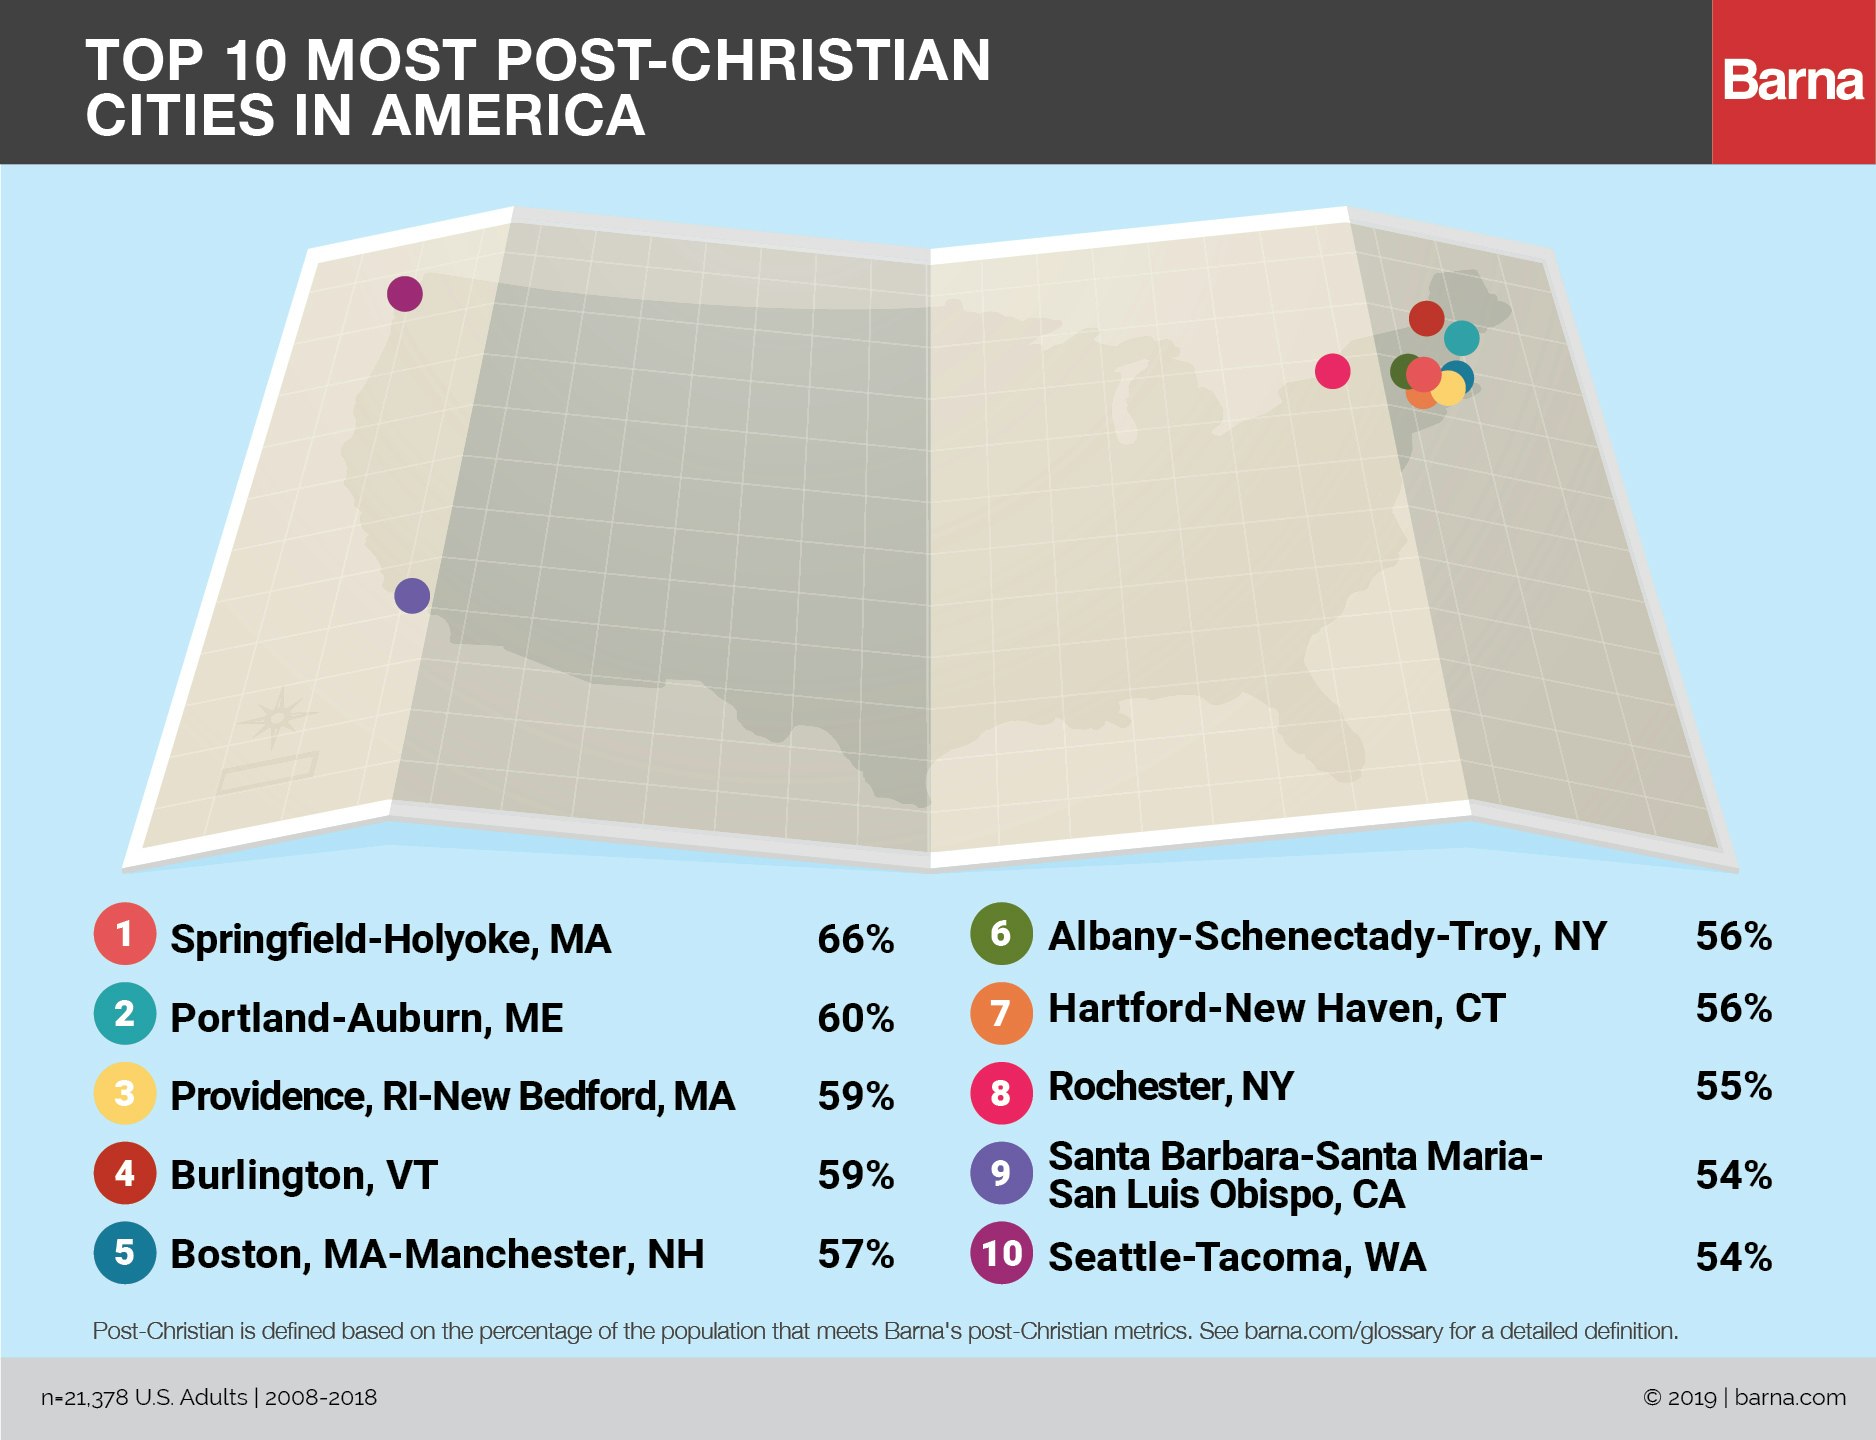 Barna Study: Here are this year’s top 10 post-Christian cities in America: